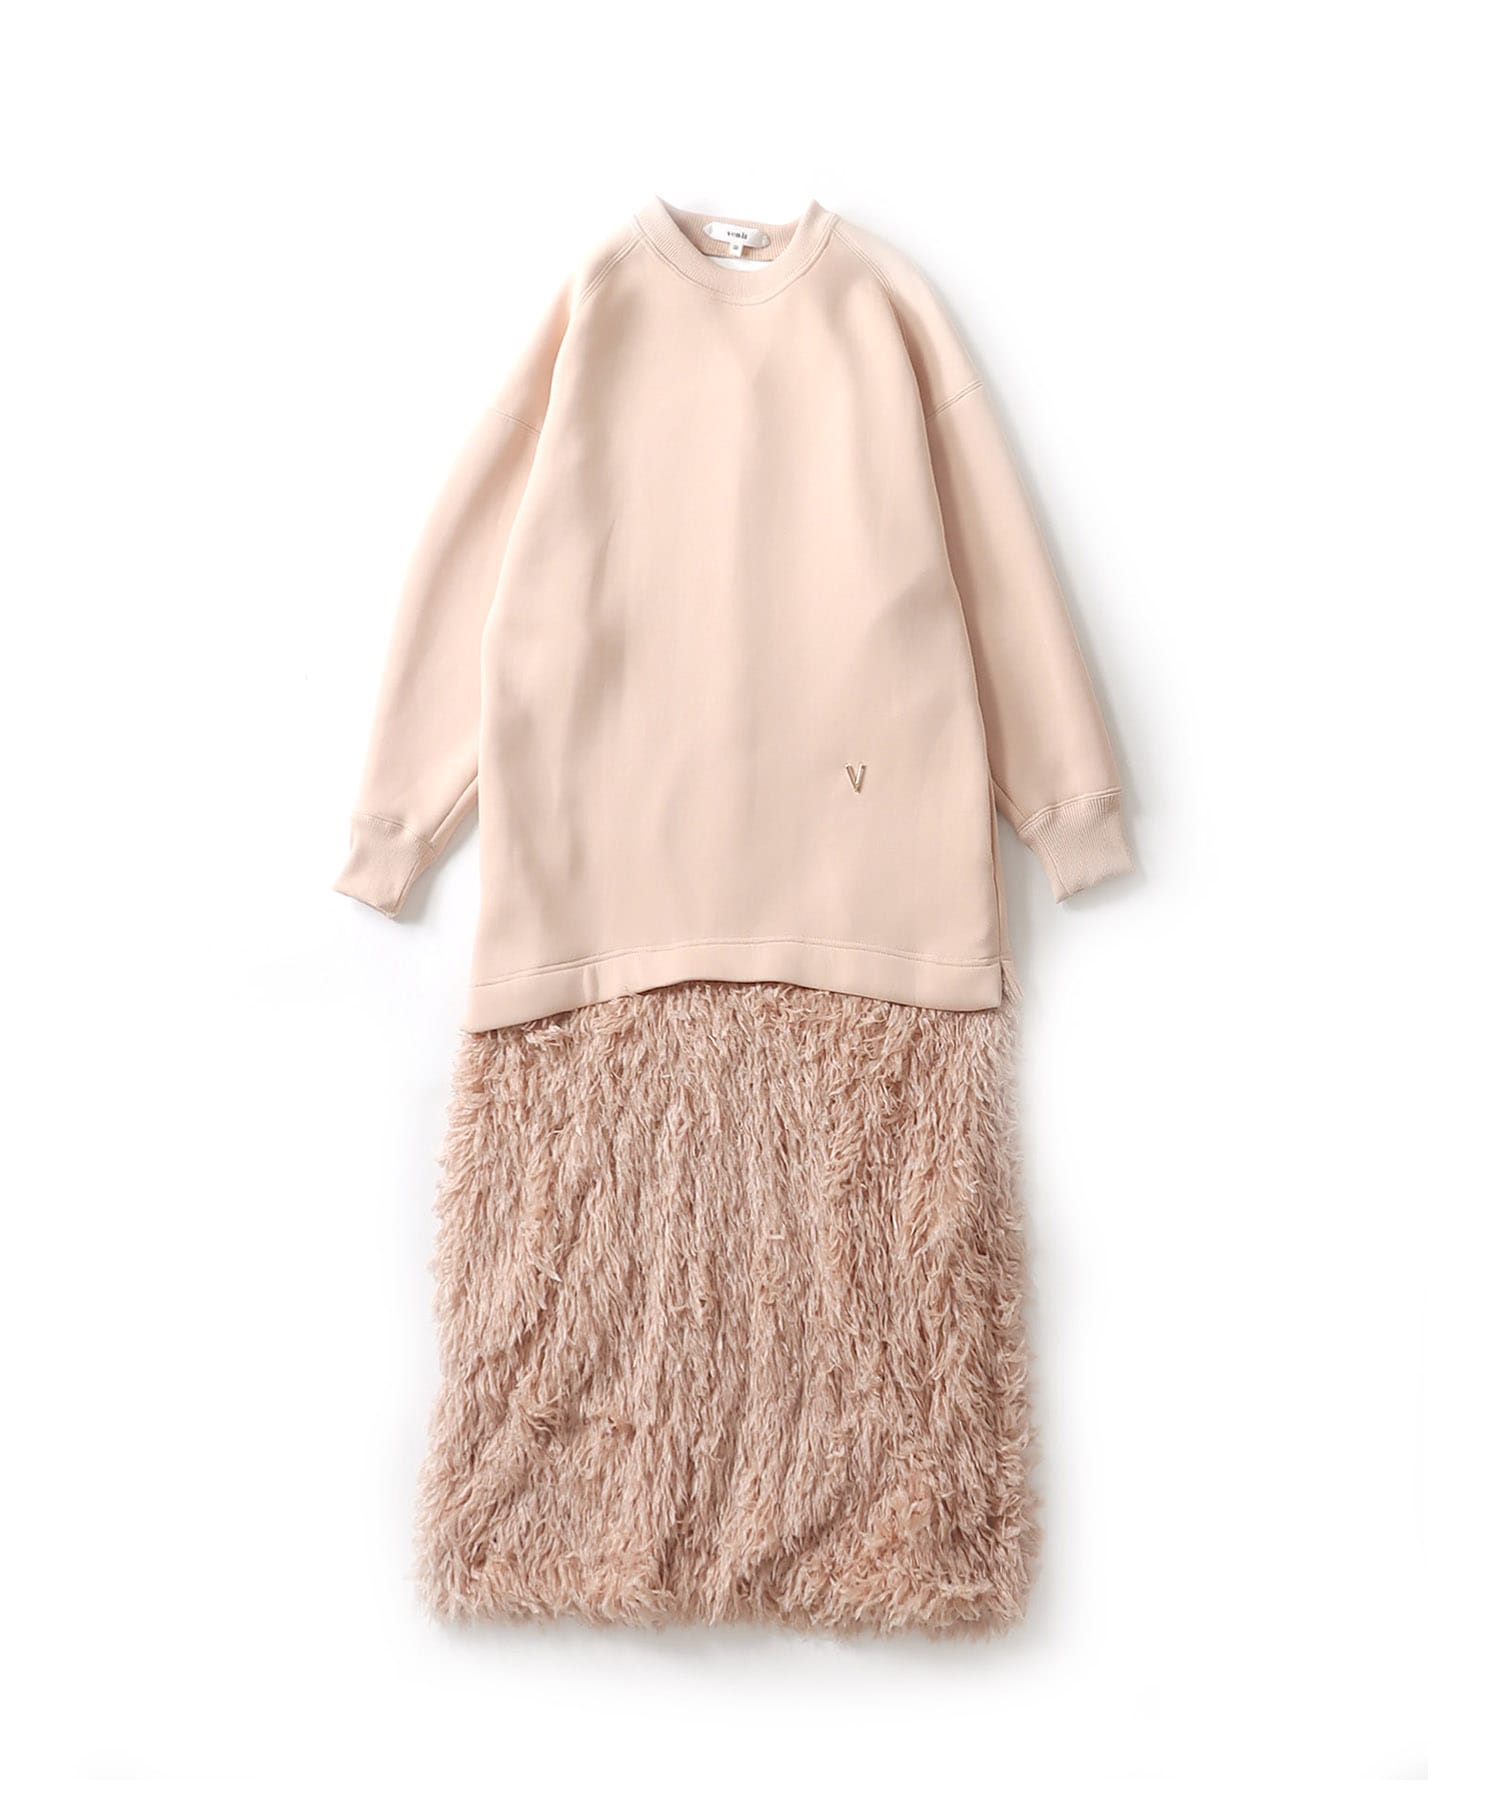 VENIT＞feather×bonding dress | AND ON JIONE STORE（アンドオン 